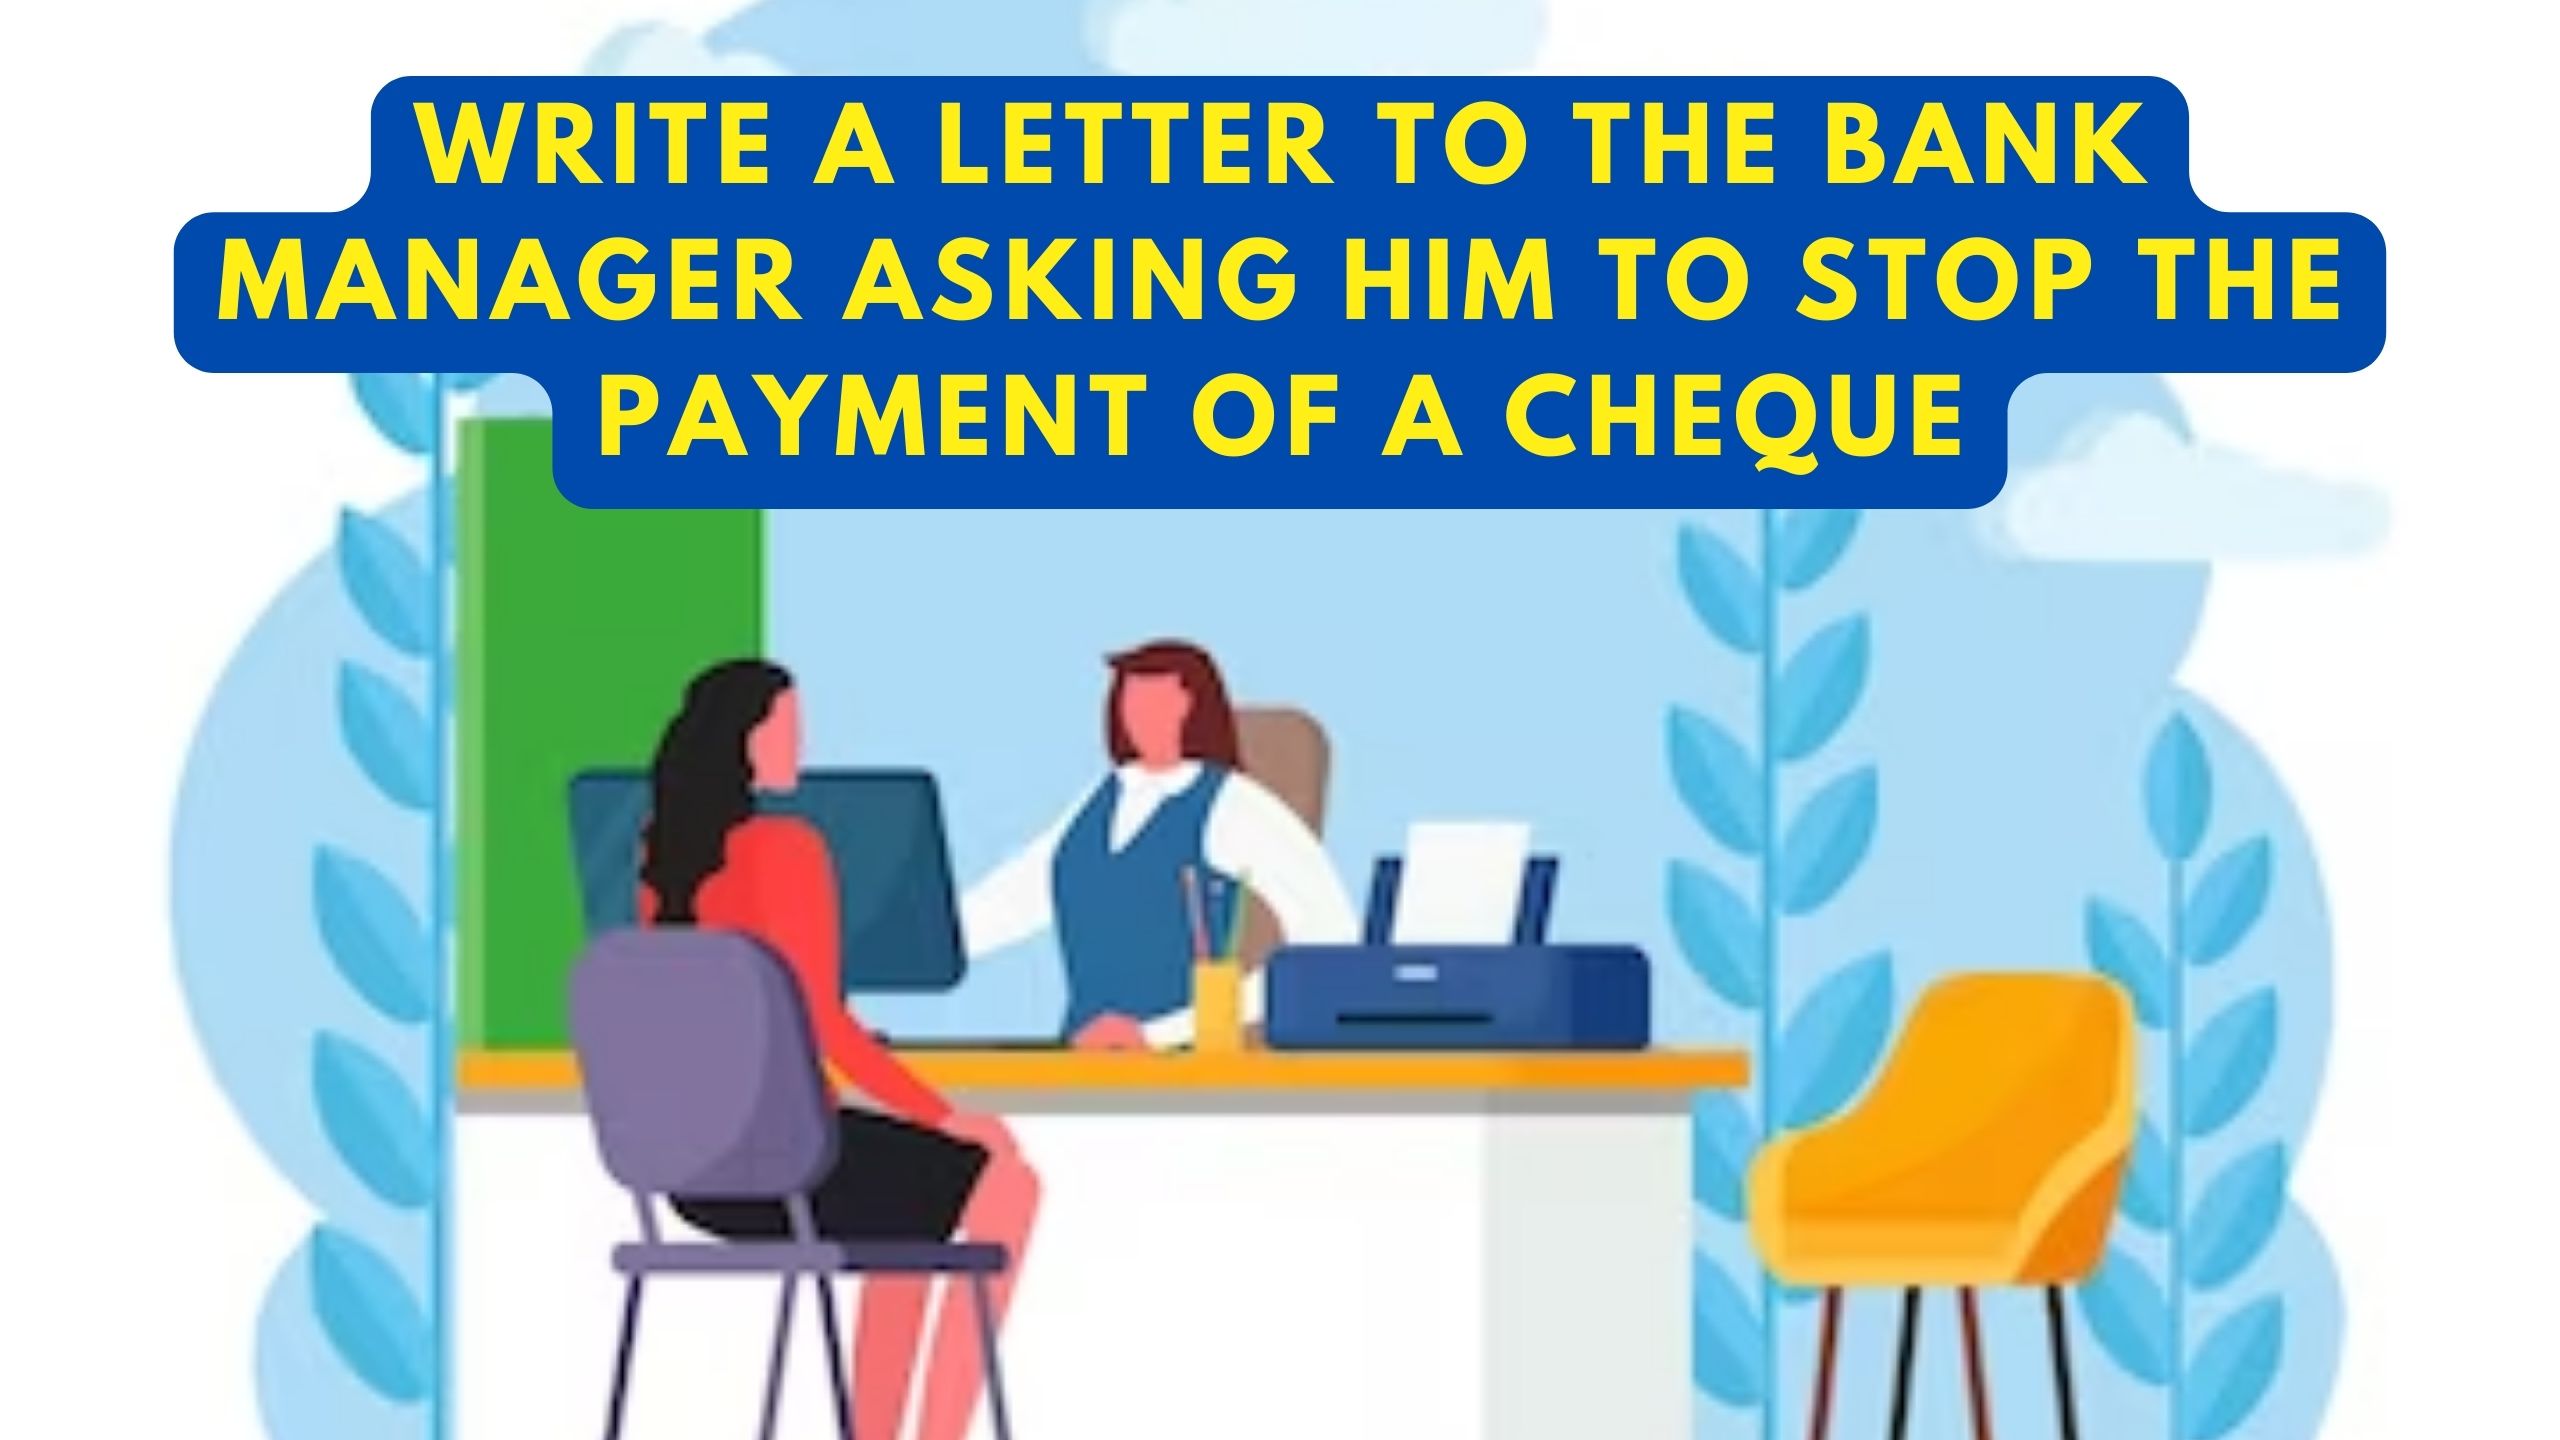 WRITE A LETTER TO BANK MANAGER ASKING HIM TO STOP THE PAYMENT OF A CHEQUE